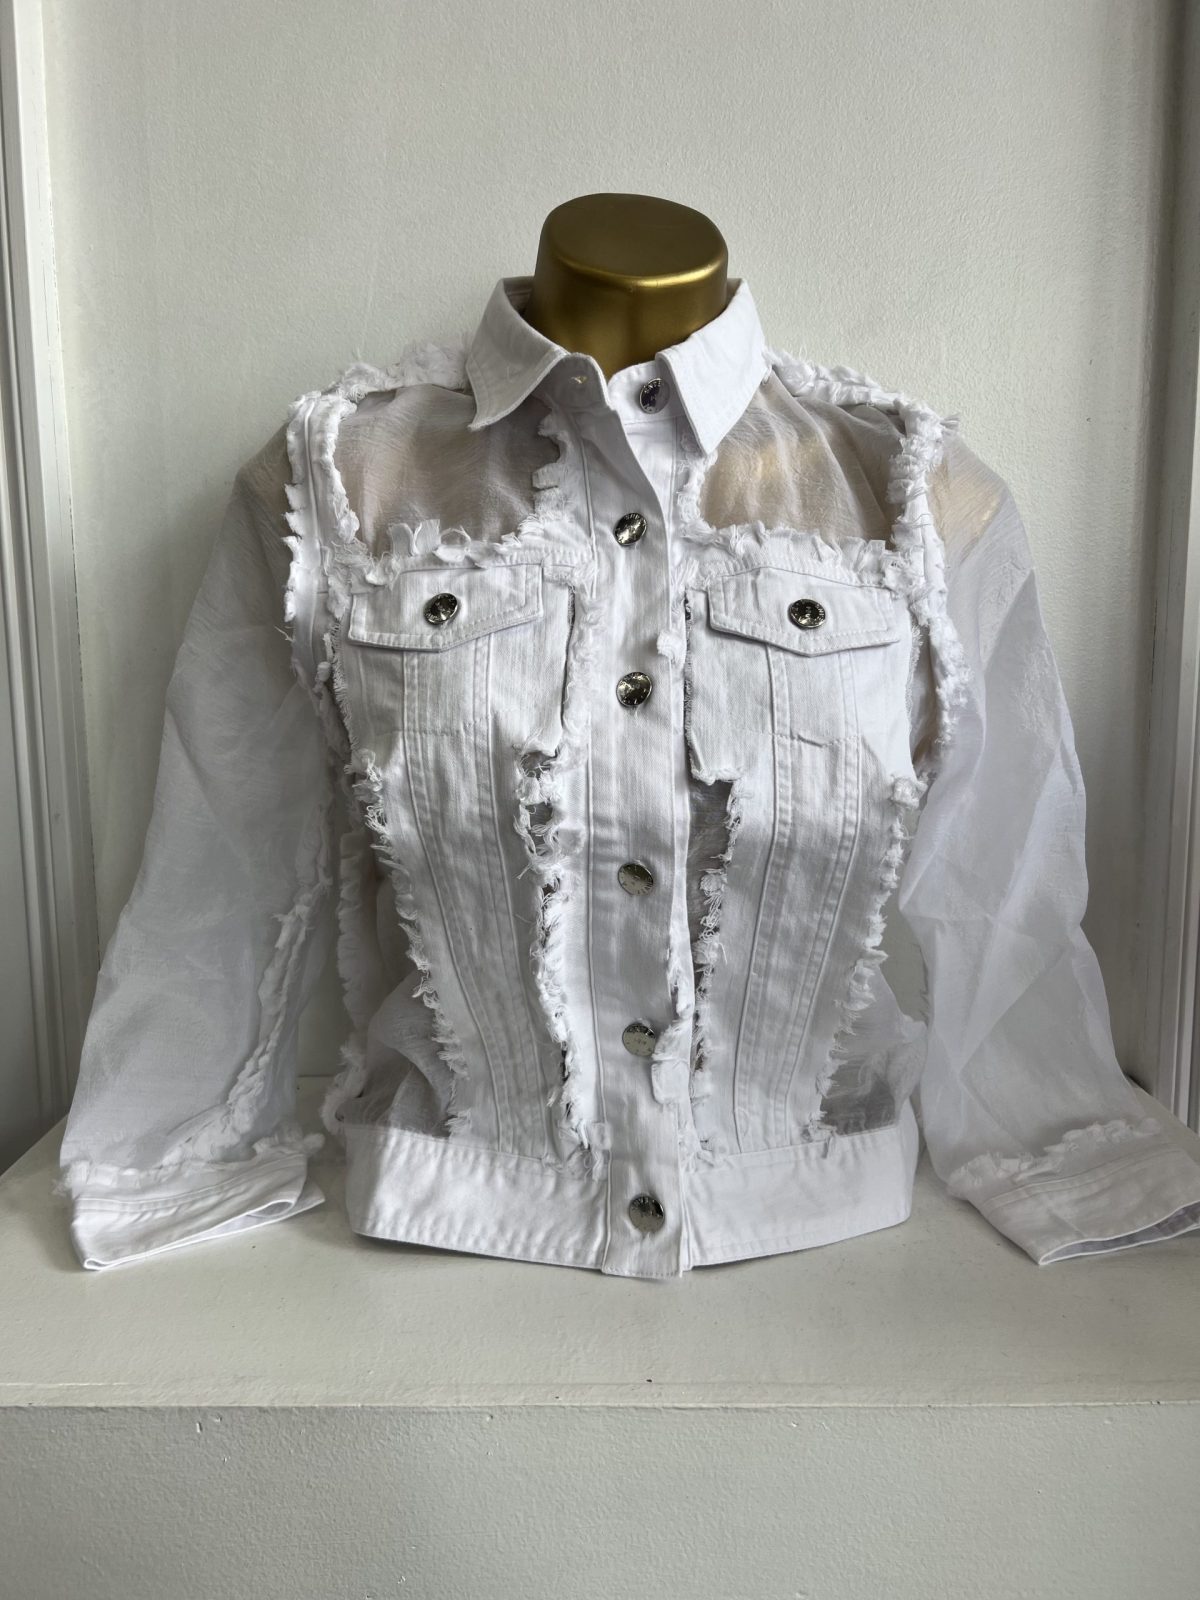 AZI Z12330 Sheera White Long Sleeve Sheer and Ruffle Accents Jacket | Ooh Ooh Shoes women's clothing and shoe boutique located in Naples and Mashpee